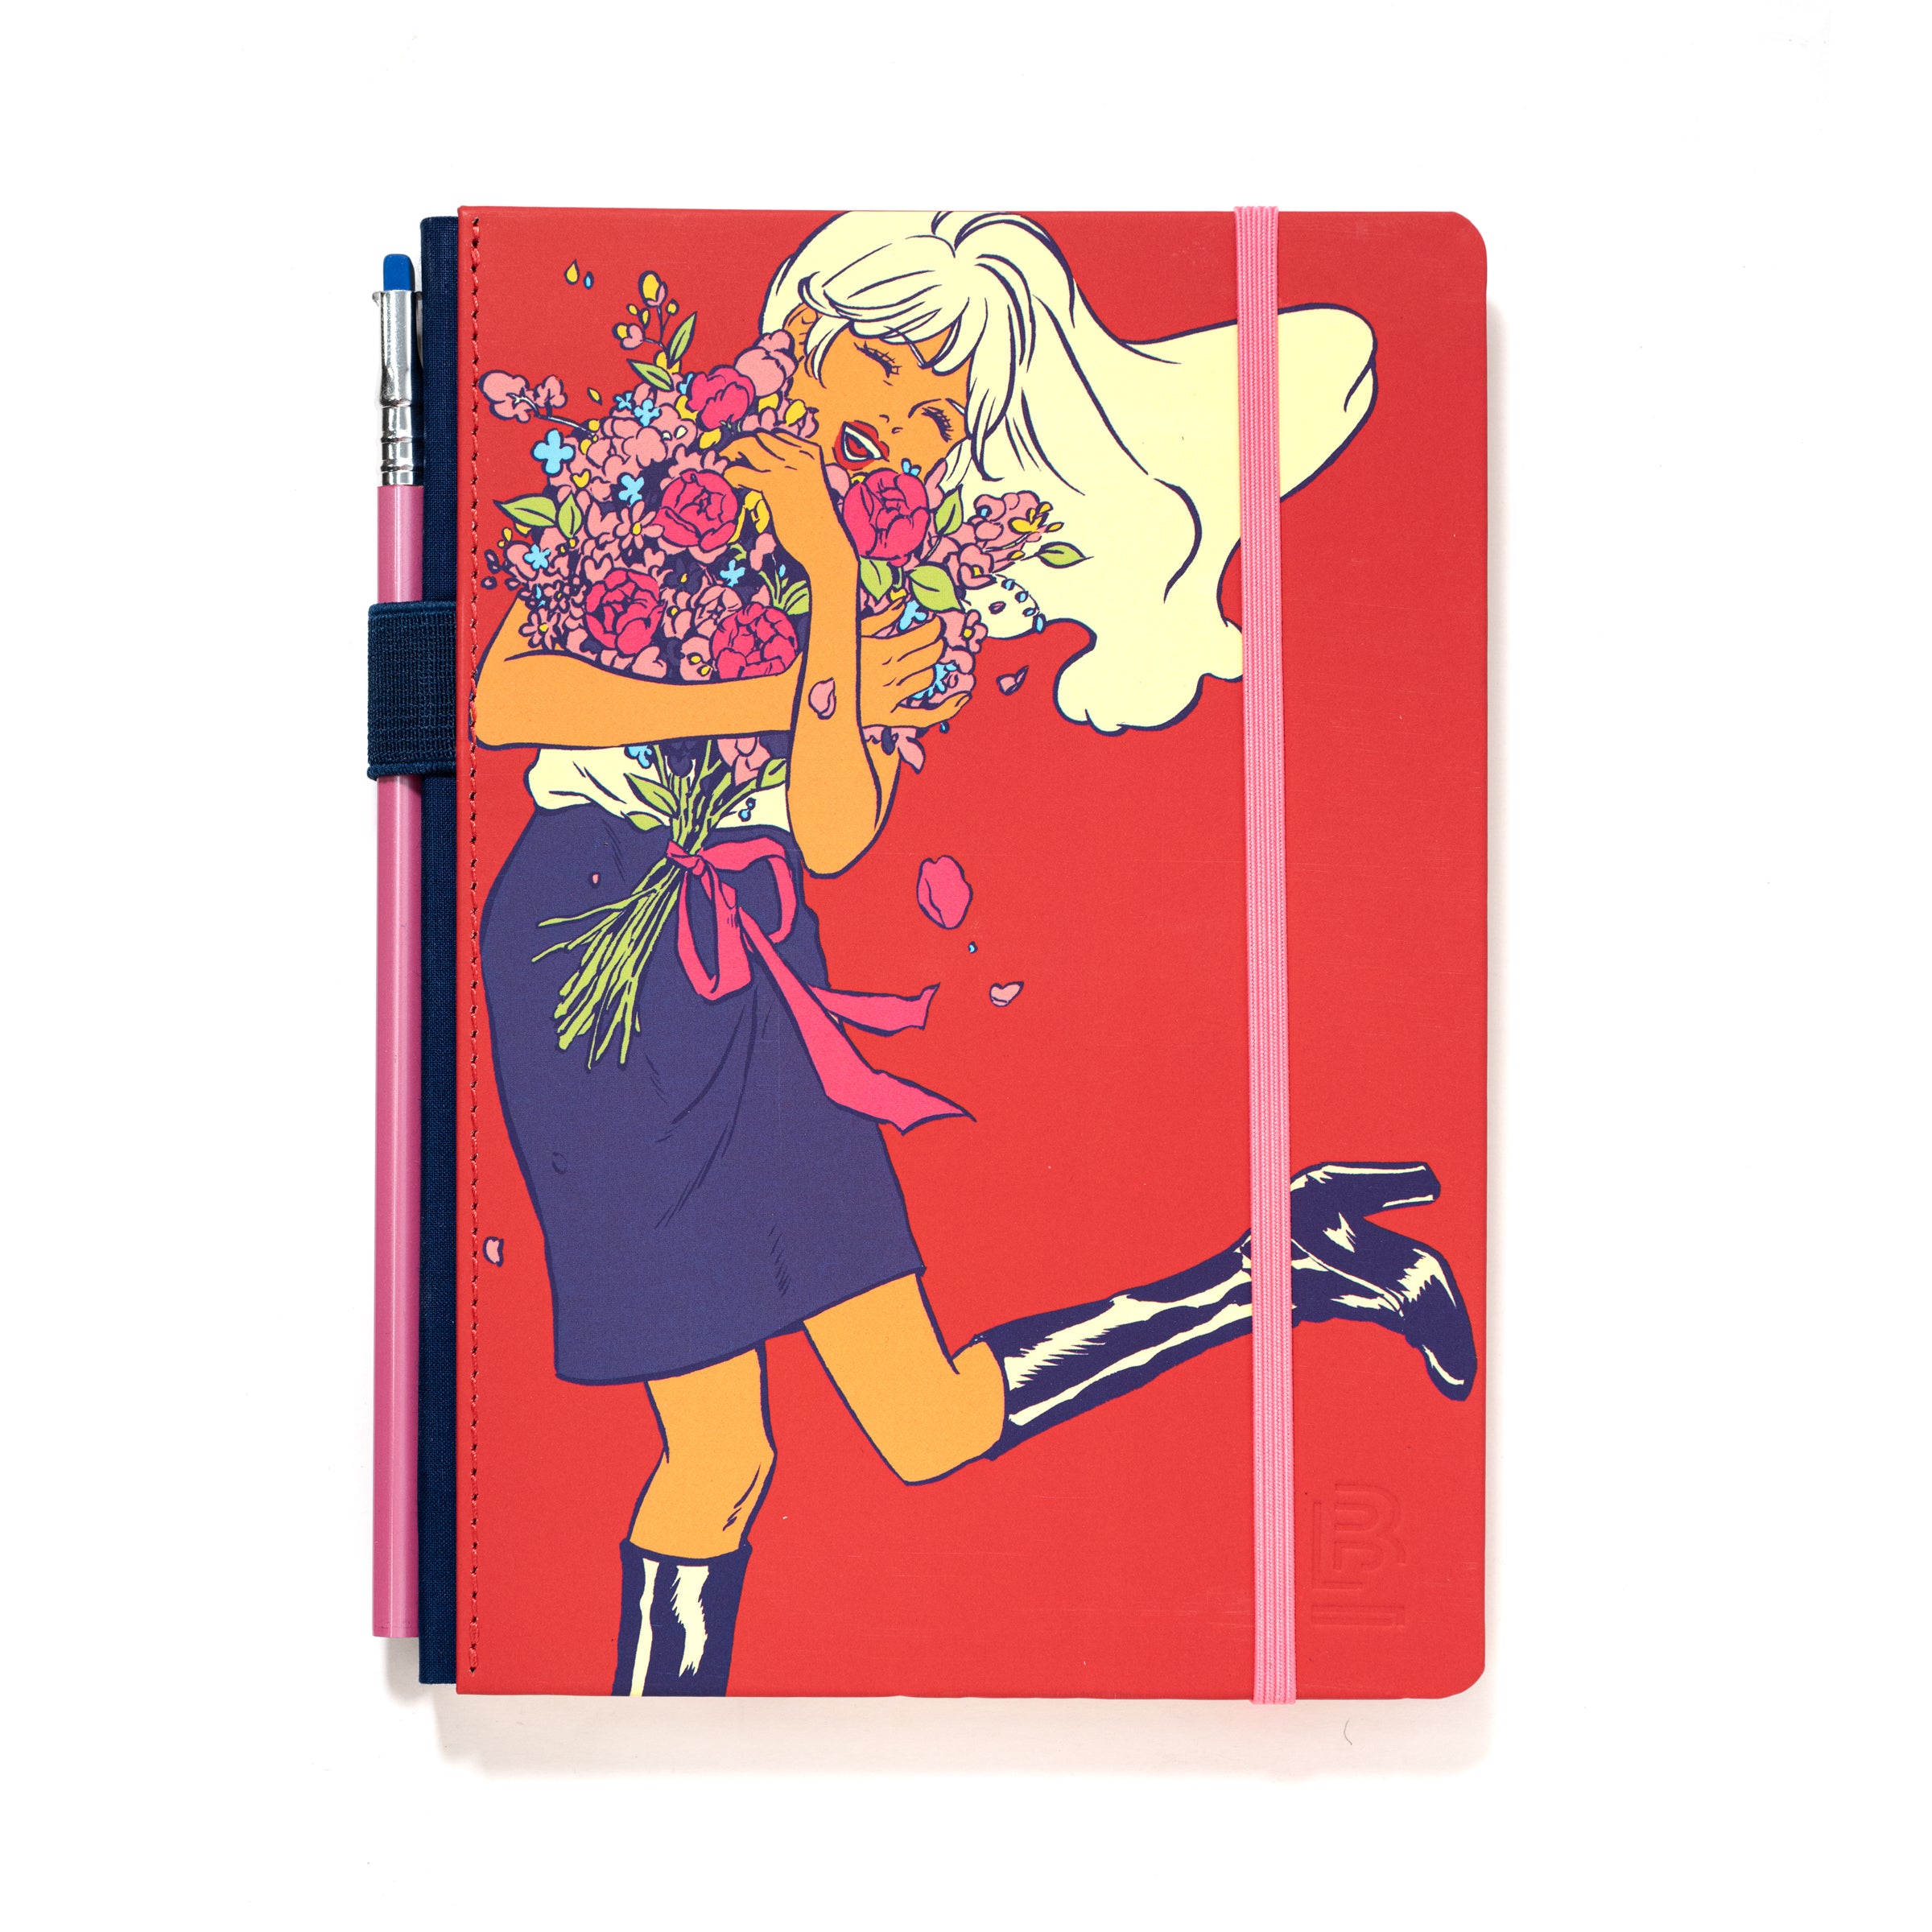 A Blackwing Artist Series Slate Notebook - Leslie Hung with a girl holding a pencil.